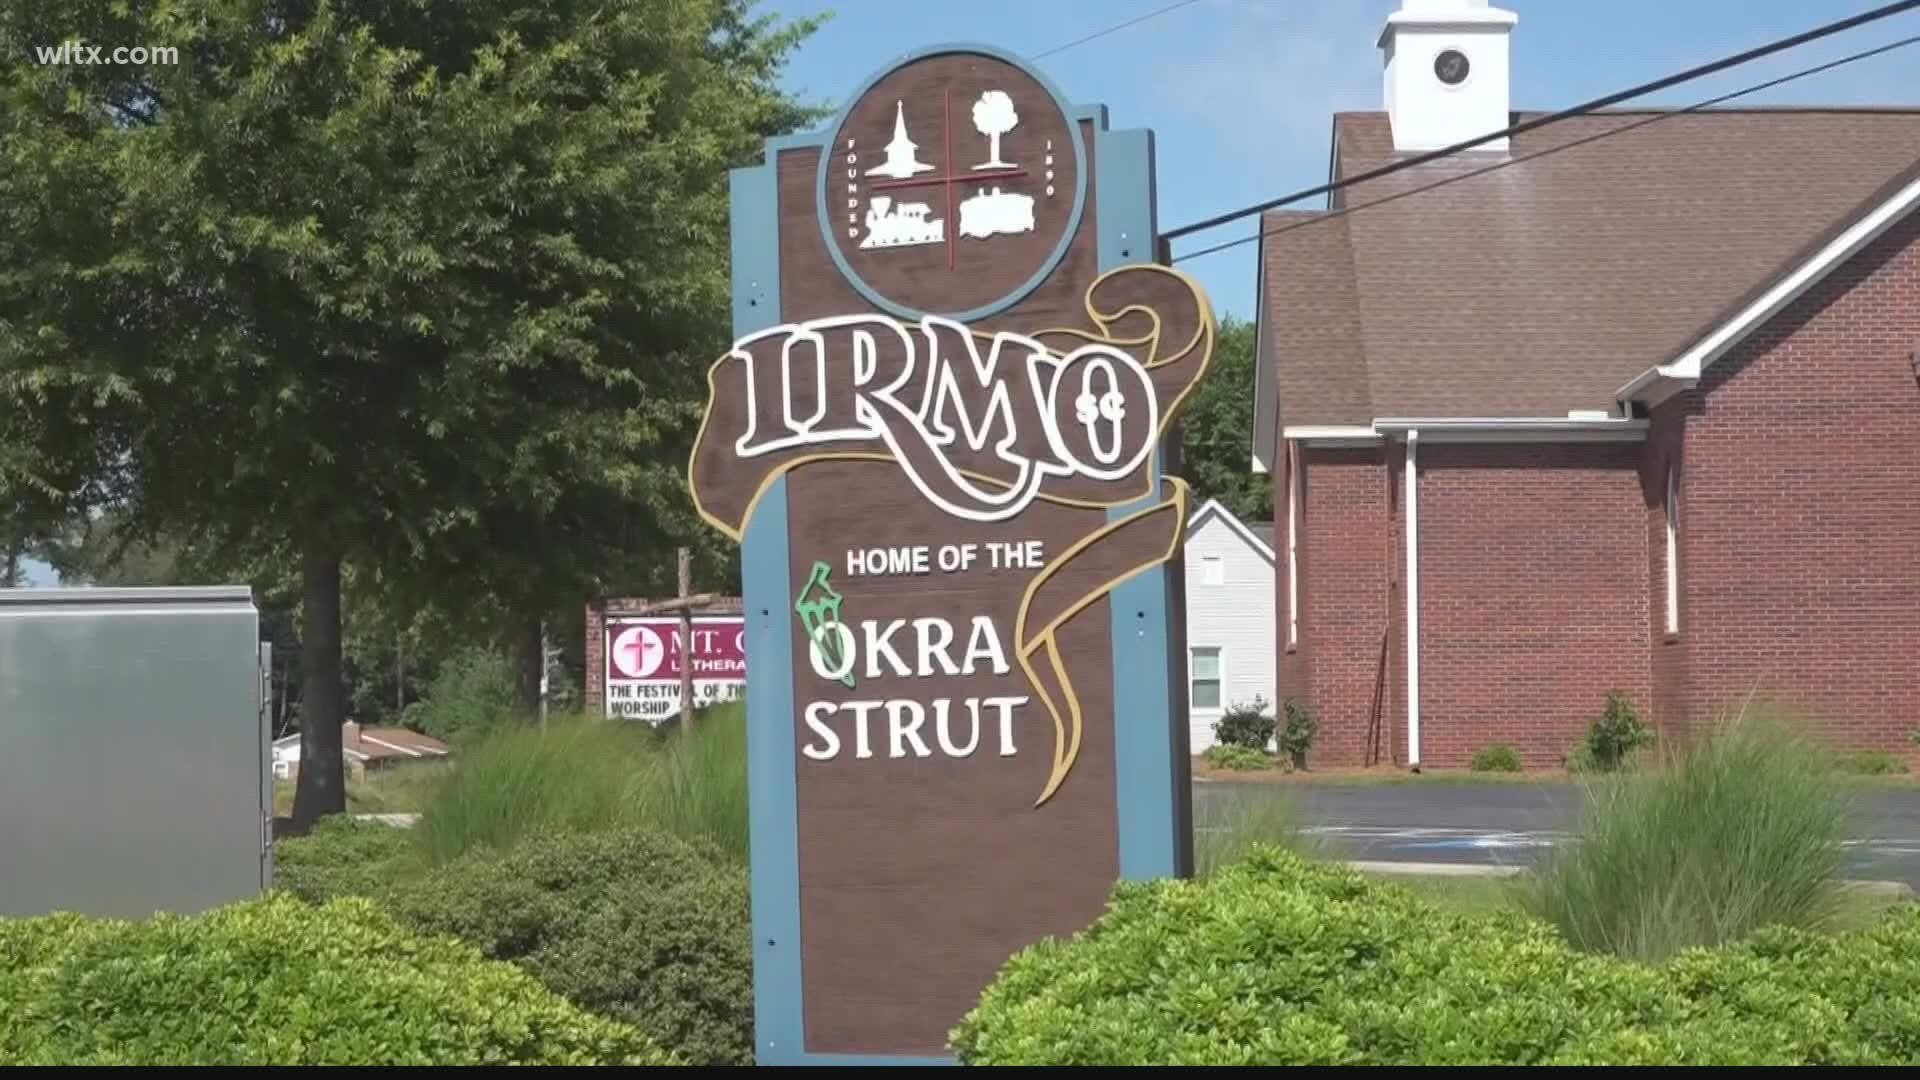 So far, the Irmo Future Growth Corporation has given over $100,000 to businesses in need.